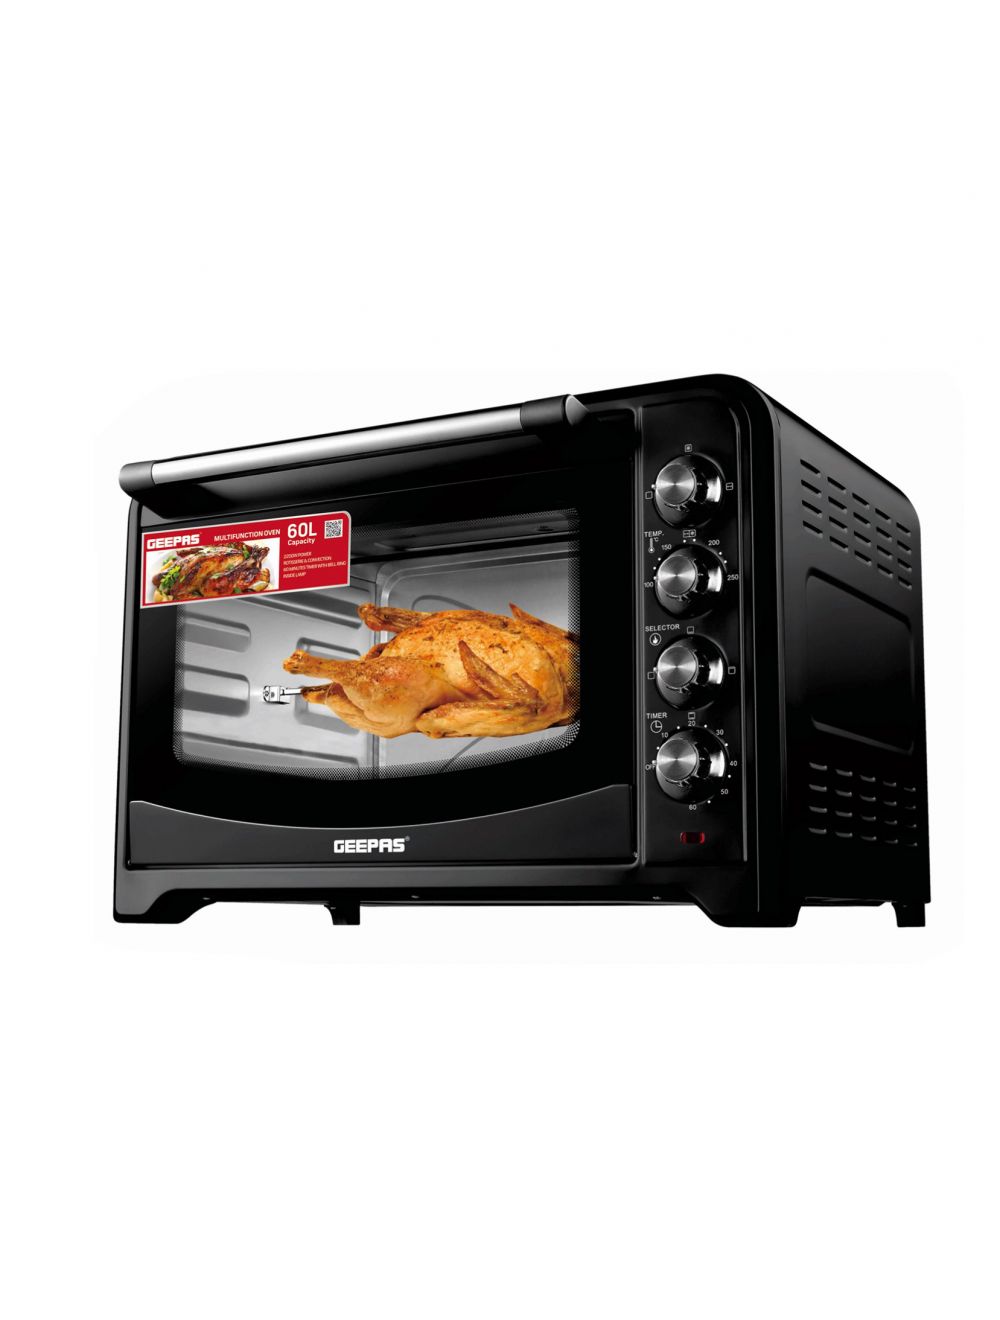 Geepas GO4401N 55L Electric Oven with Convection and Rotisserie, Black